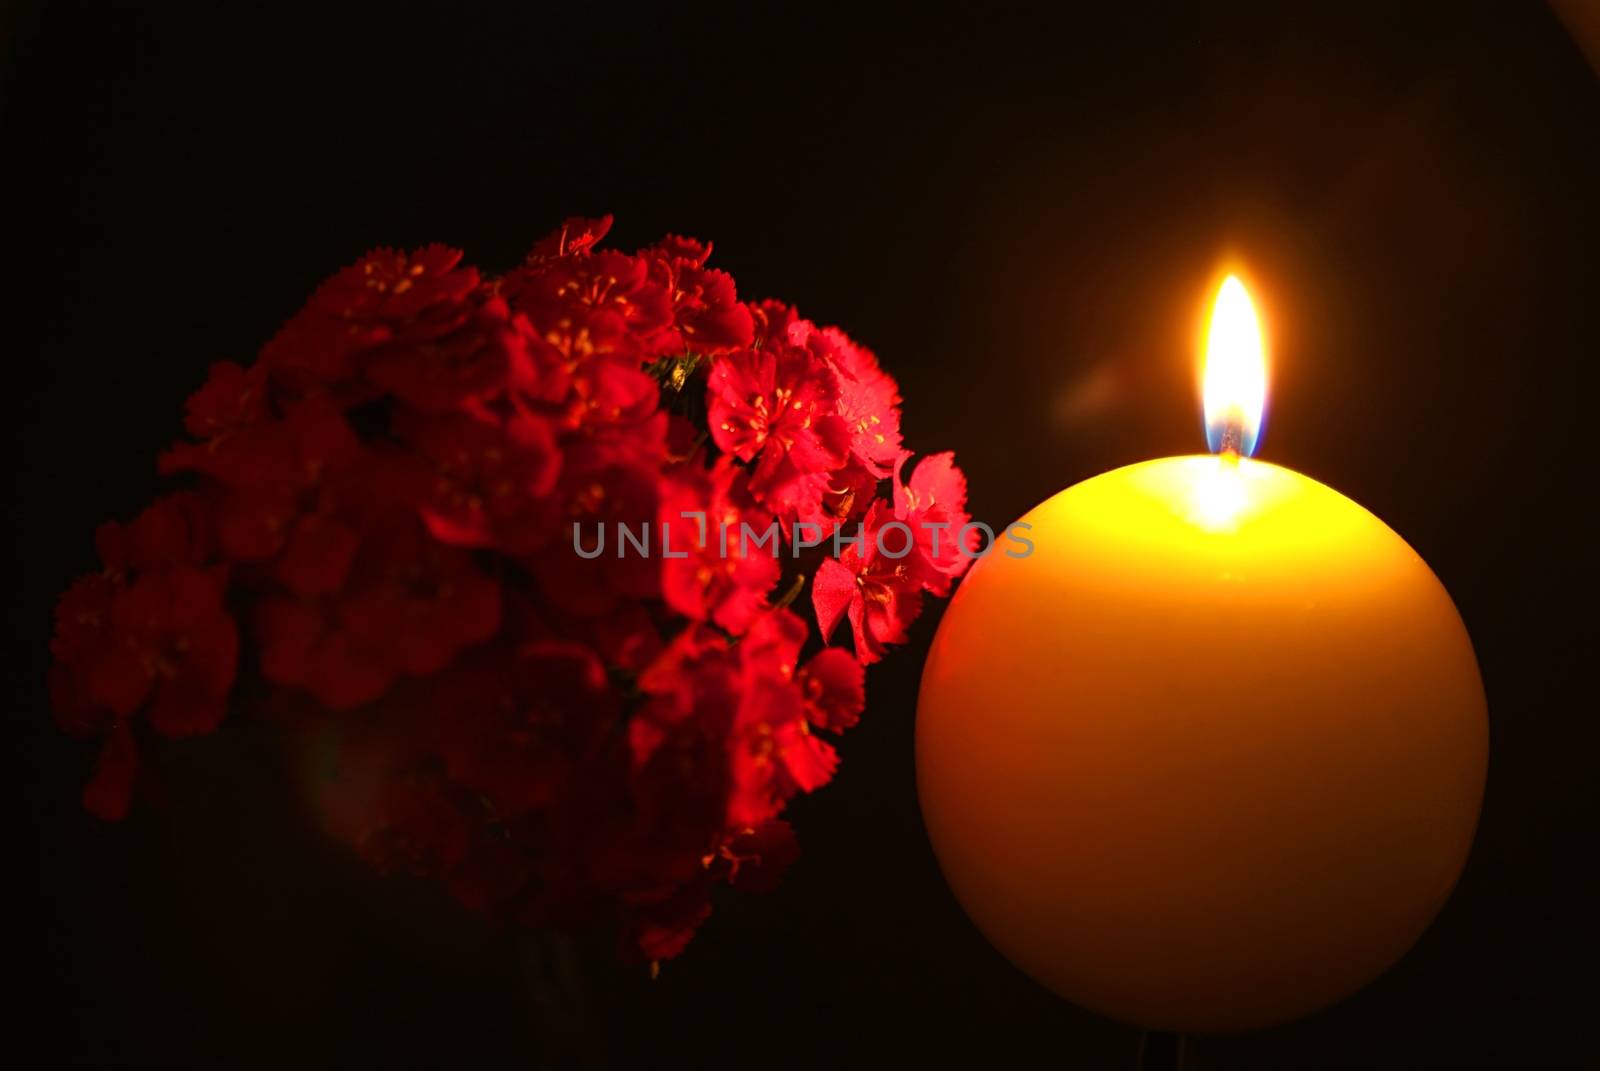 Prayer and hope concept. Retro candle light and red flower with lighting effect and glitter abstract background with bokeh defocused lights.